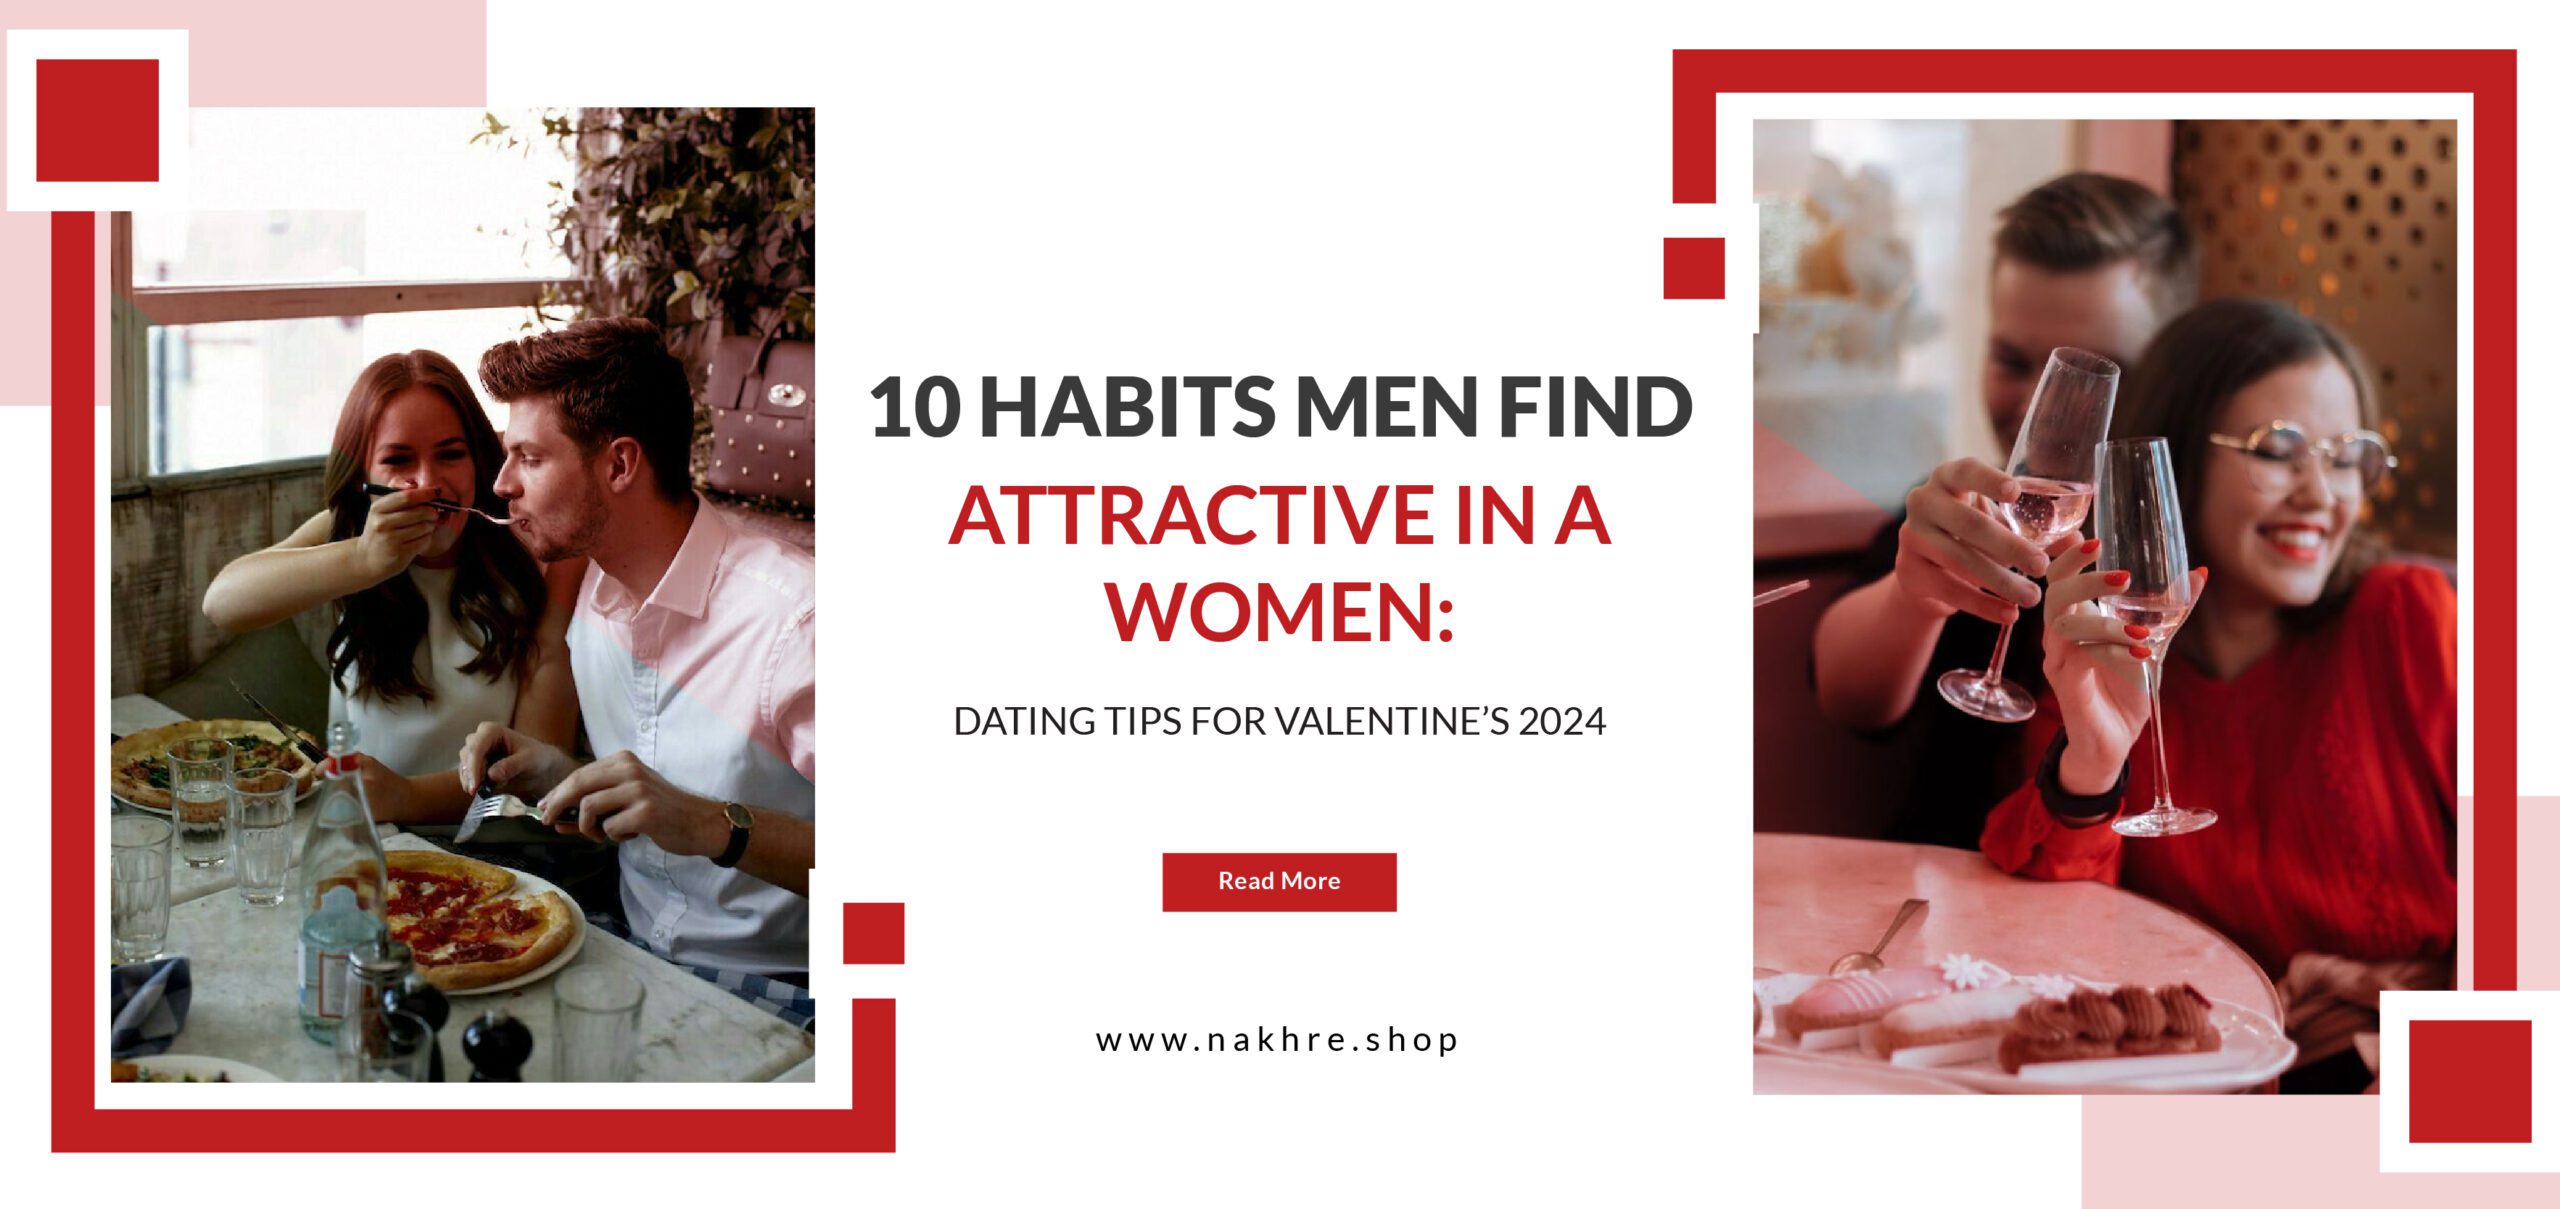 10 first date tips for valentine's day Habits Men Like